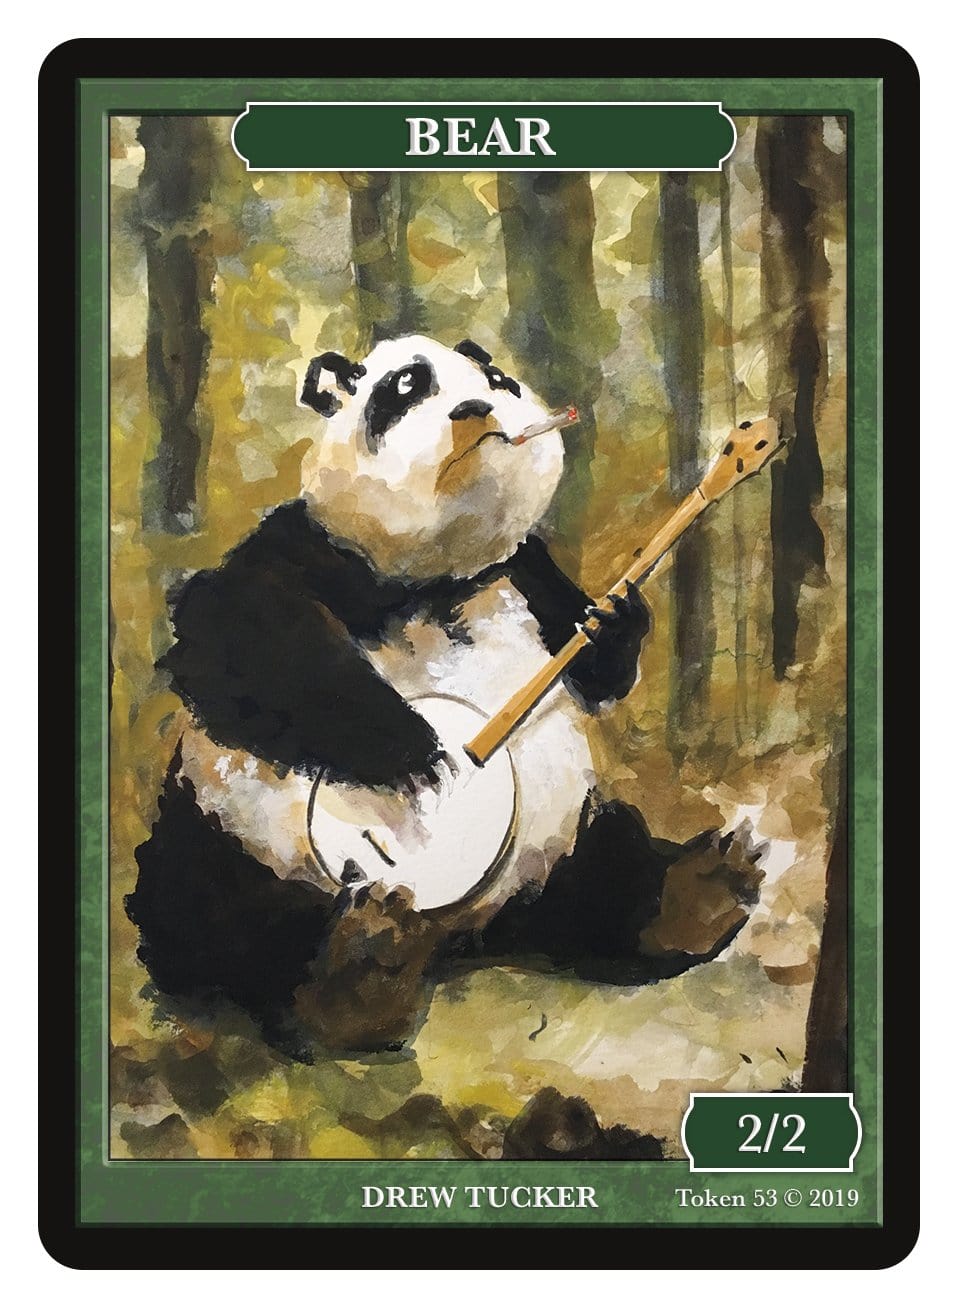 Bear Token (2/2) by Drew Tucker - Token - Original Magic Art - Accessories for Magic the Gathering and other card games